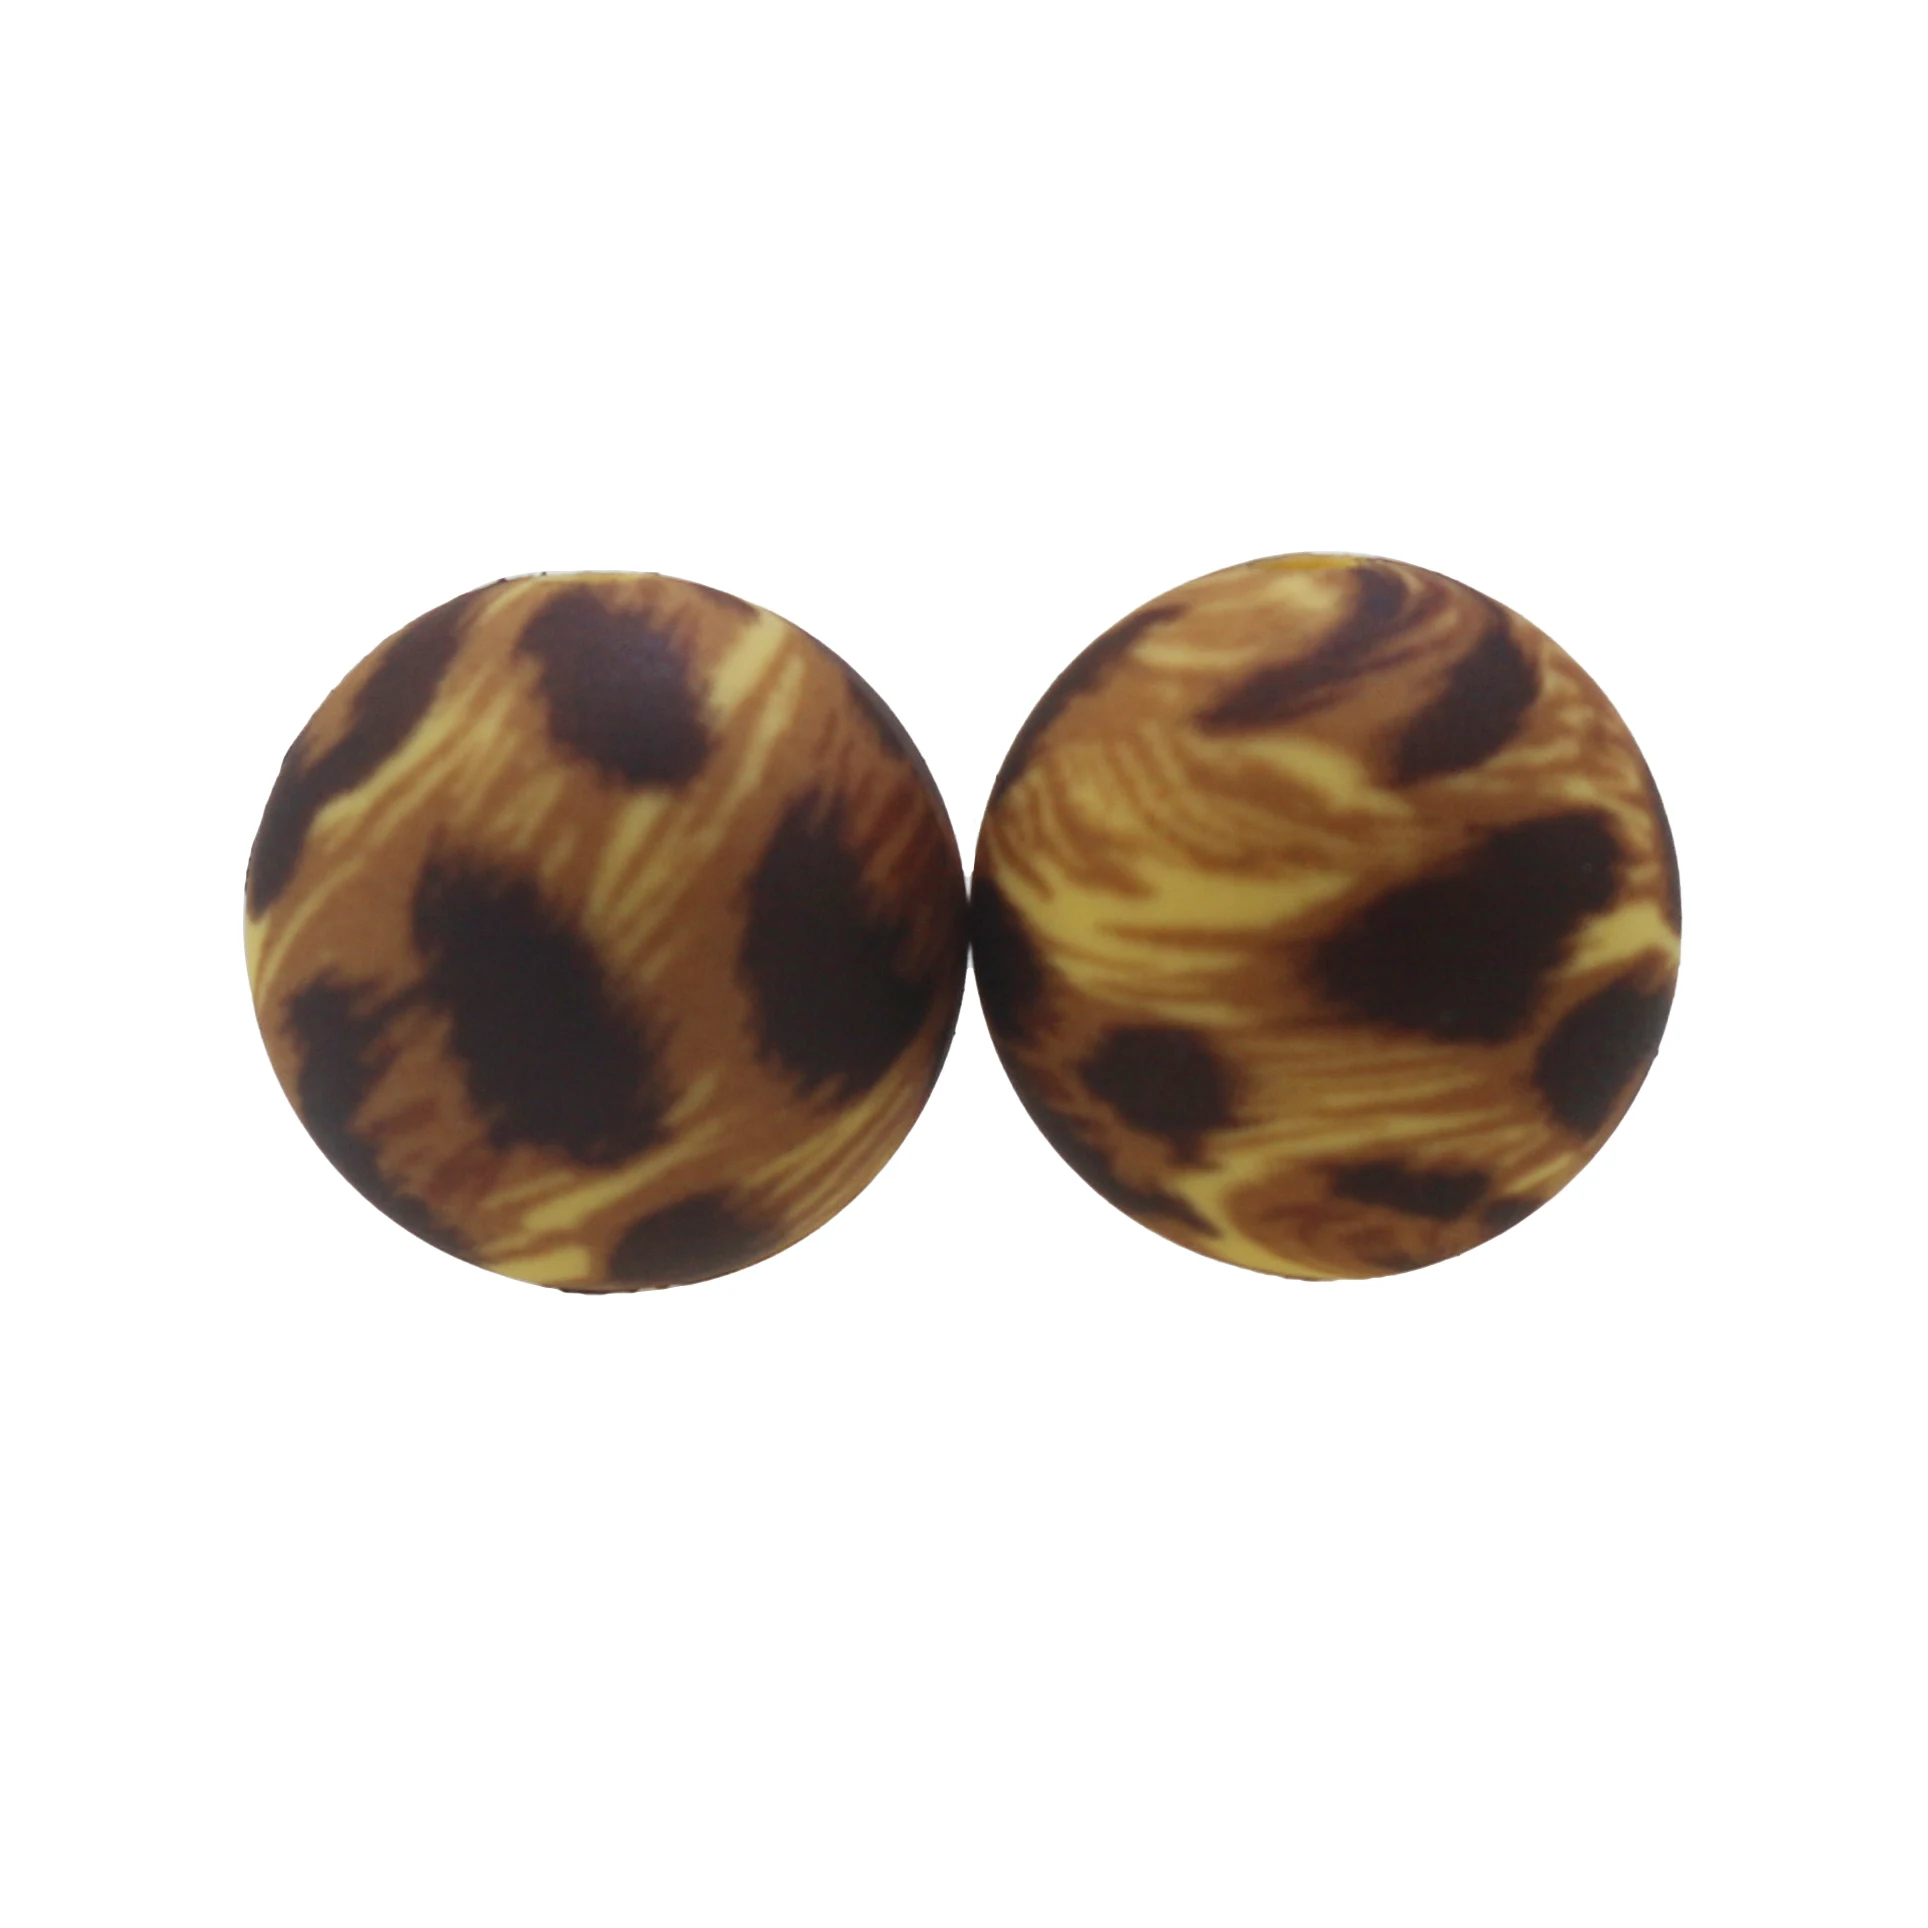 

Leopard print Silicone Beads Baby Round Shaped Beads Teething BPA Free DIY Sensory Chewing Toy Accessories, 50 colors